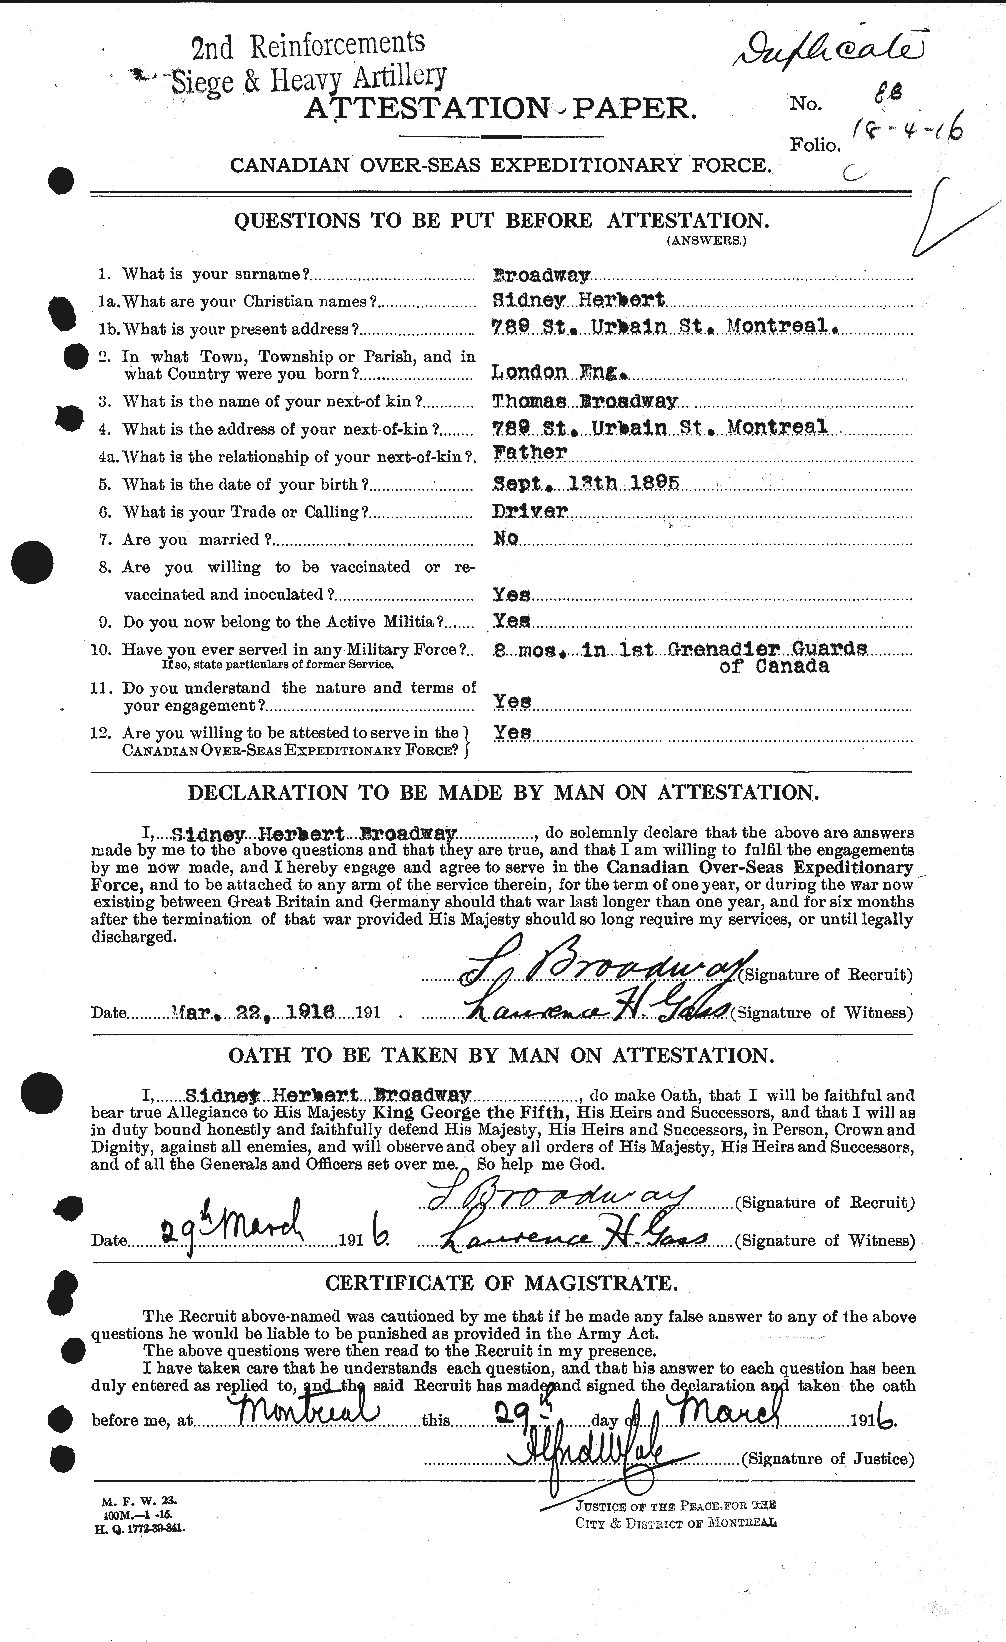 Personnel Records of the First World War - CEF 263826a